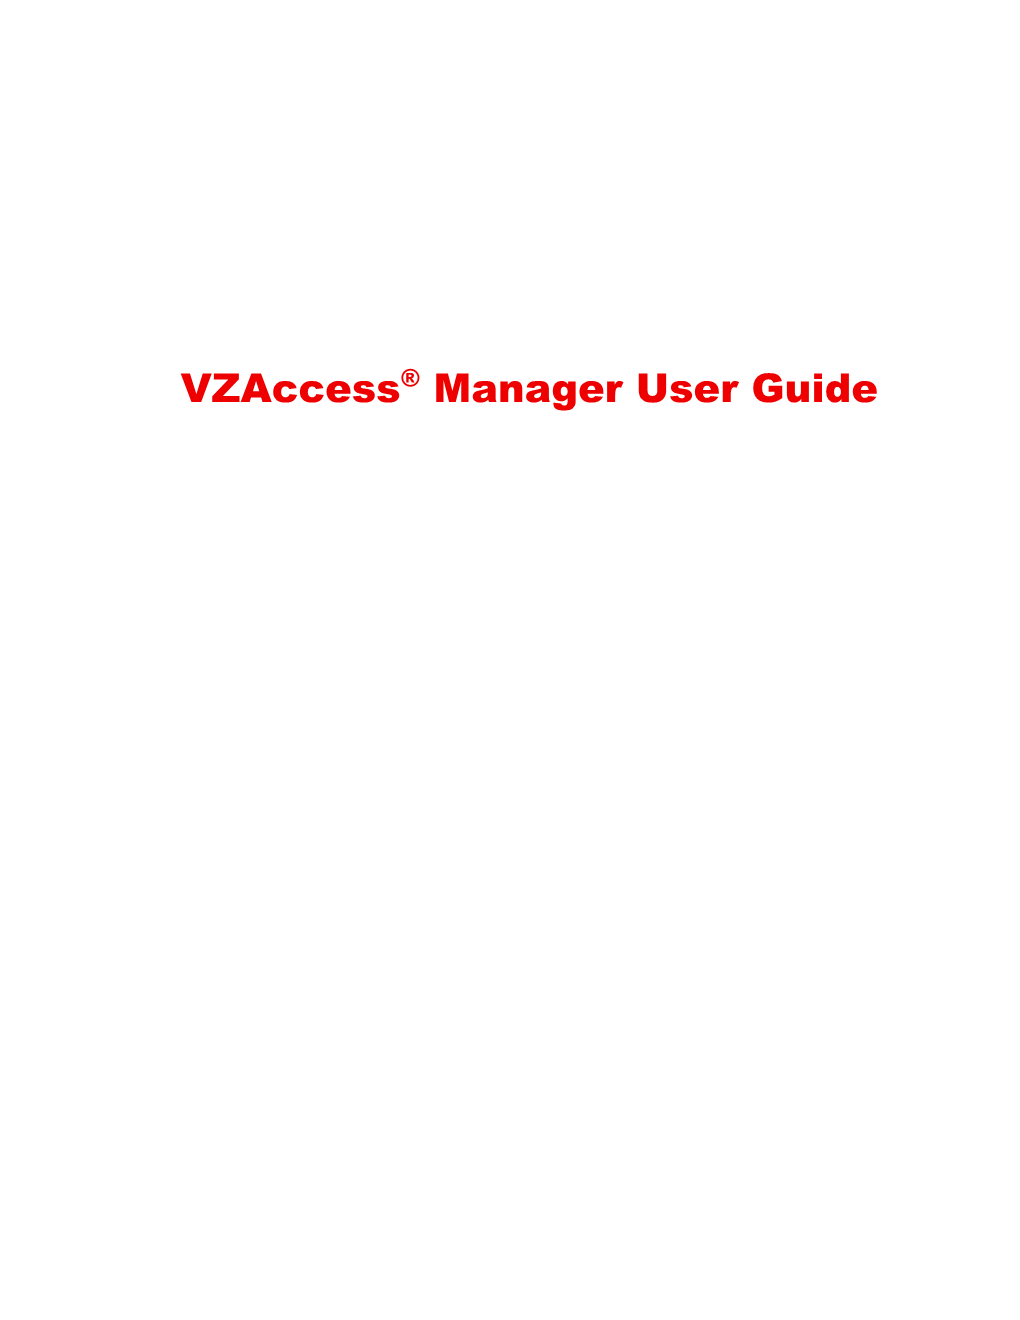 Vzaccess® Manager User Guide Table of Contents